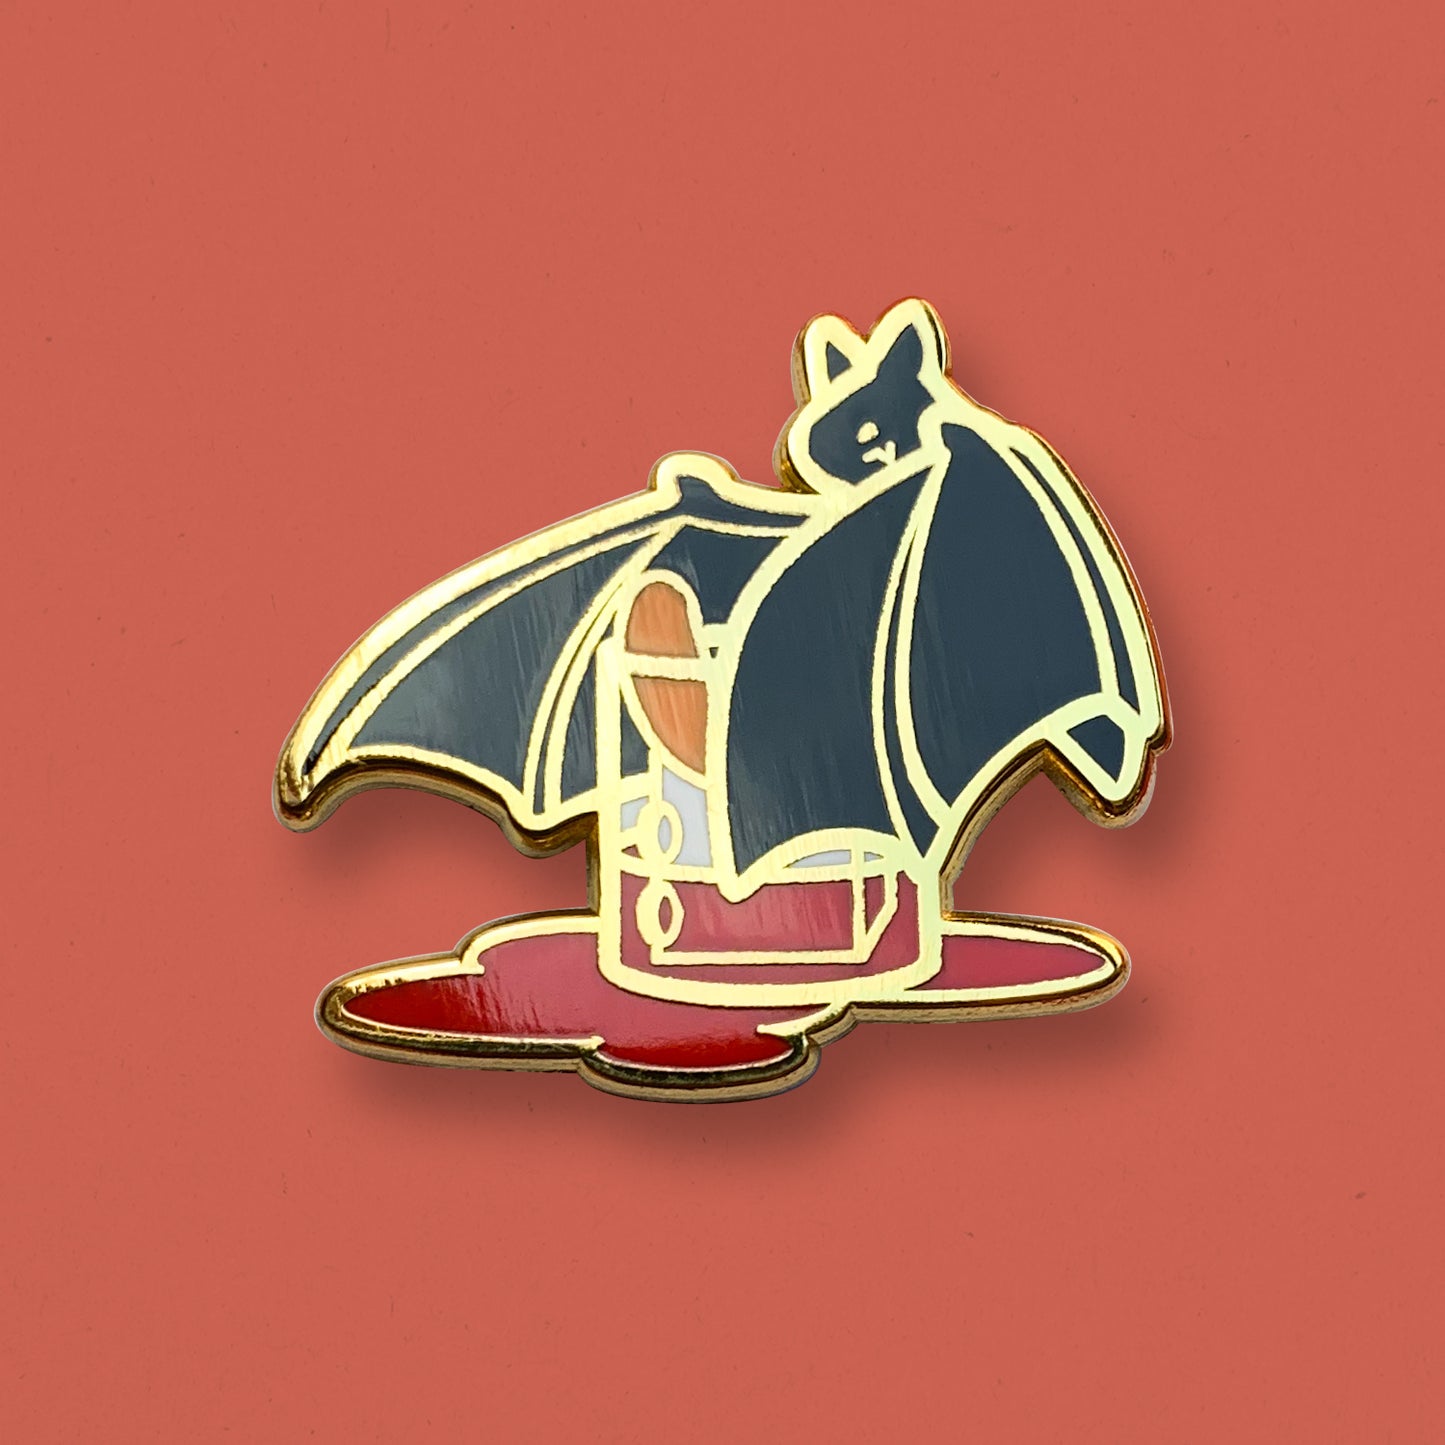 Bacardi Rum Negroni Cocktail Enamel Pin by Cocktail Critters